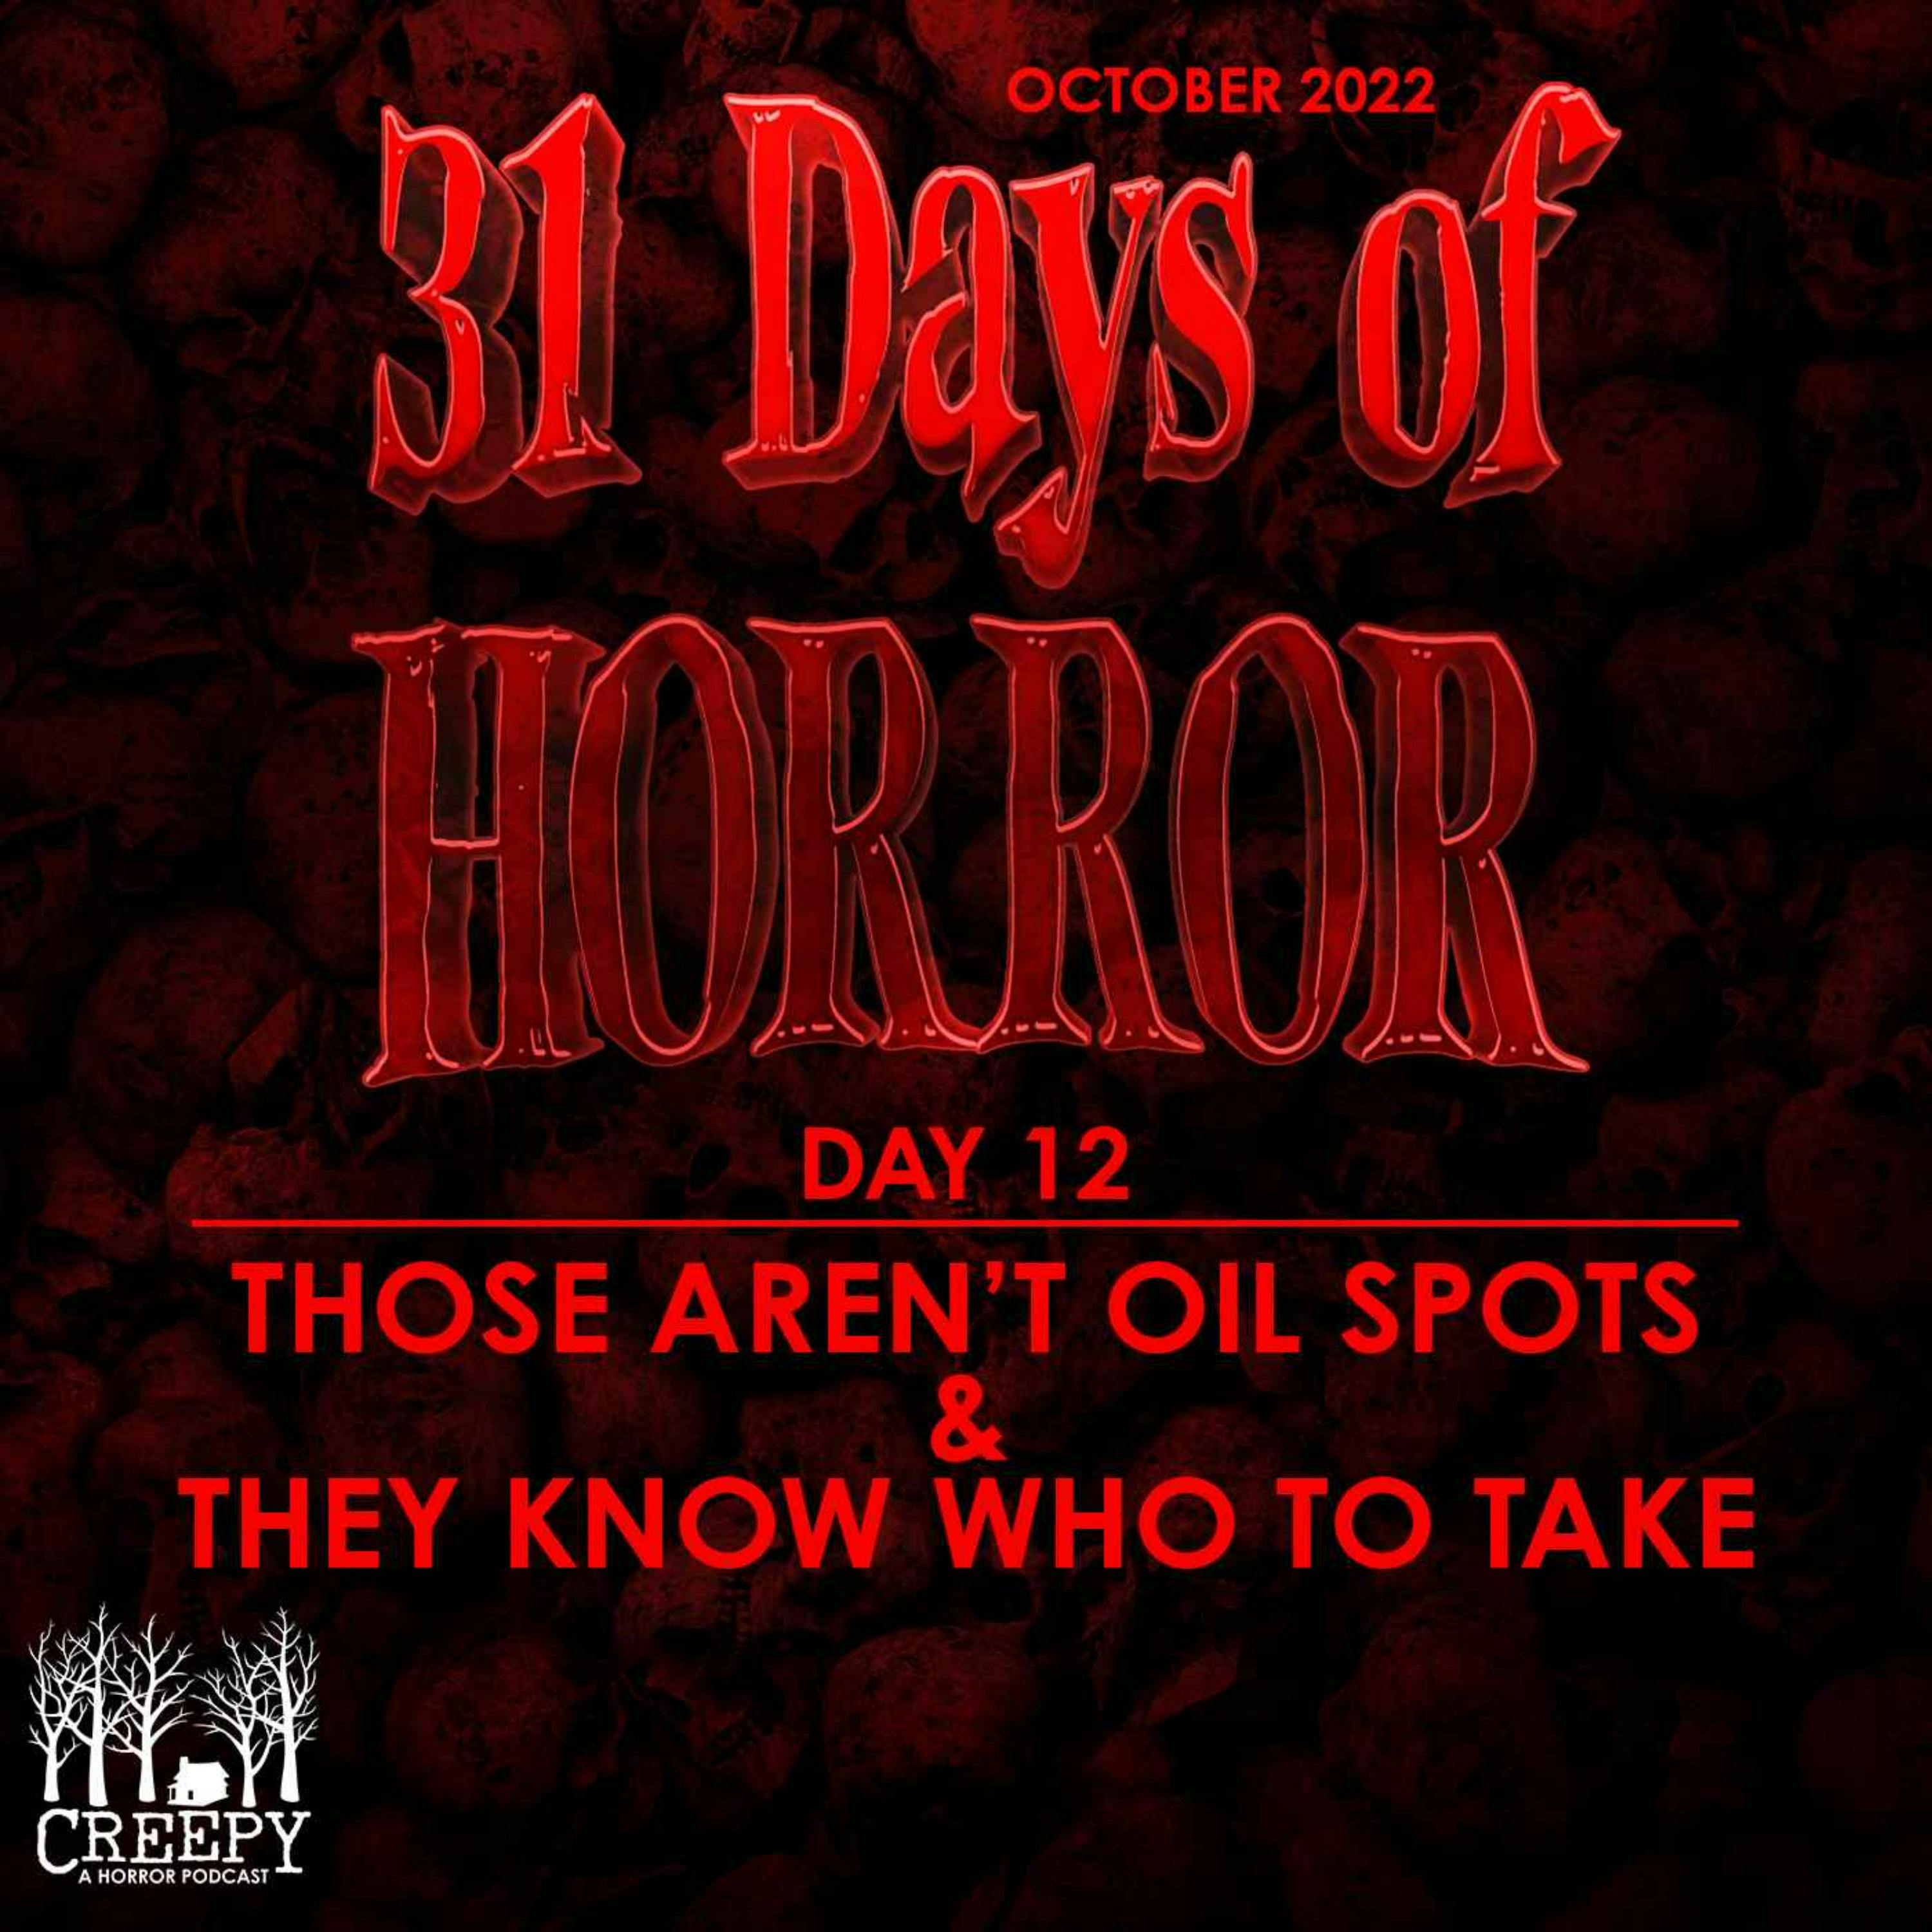 Day 12 - Those Aren’t Oil Spots & They Know Who To Take